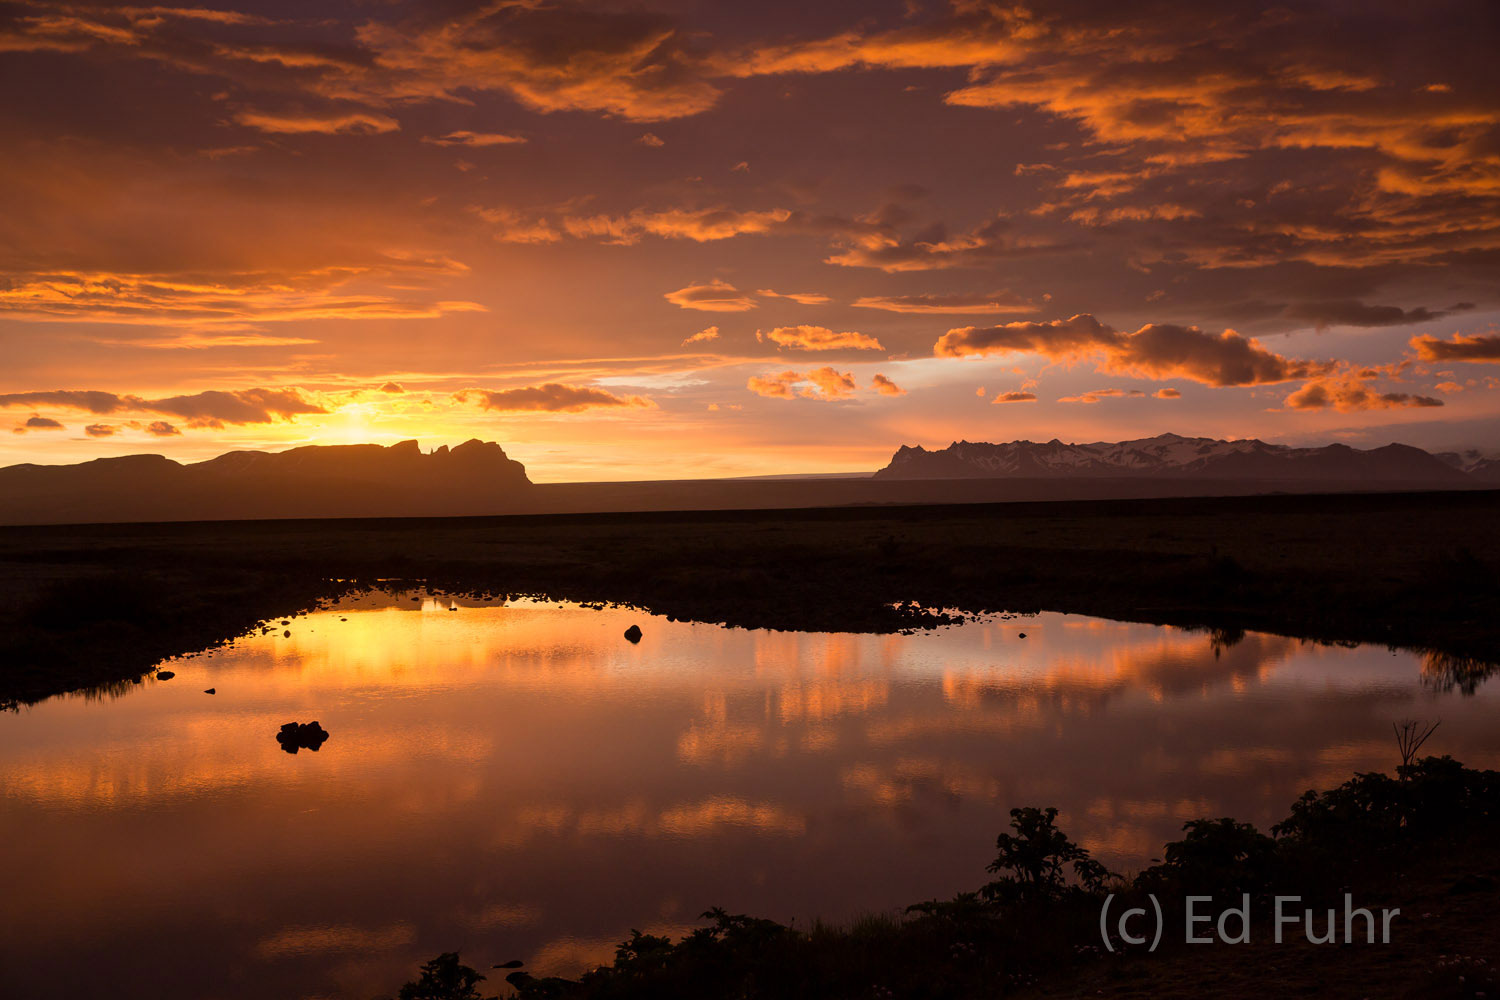 Sunrise over one of the many streams of water draining Iceland's ice fields.